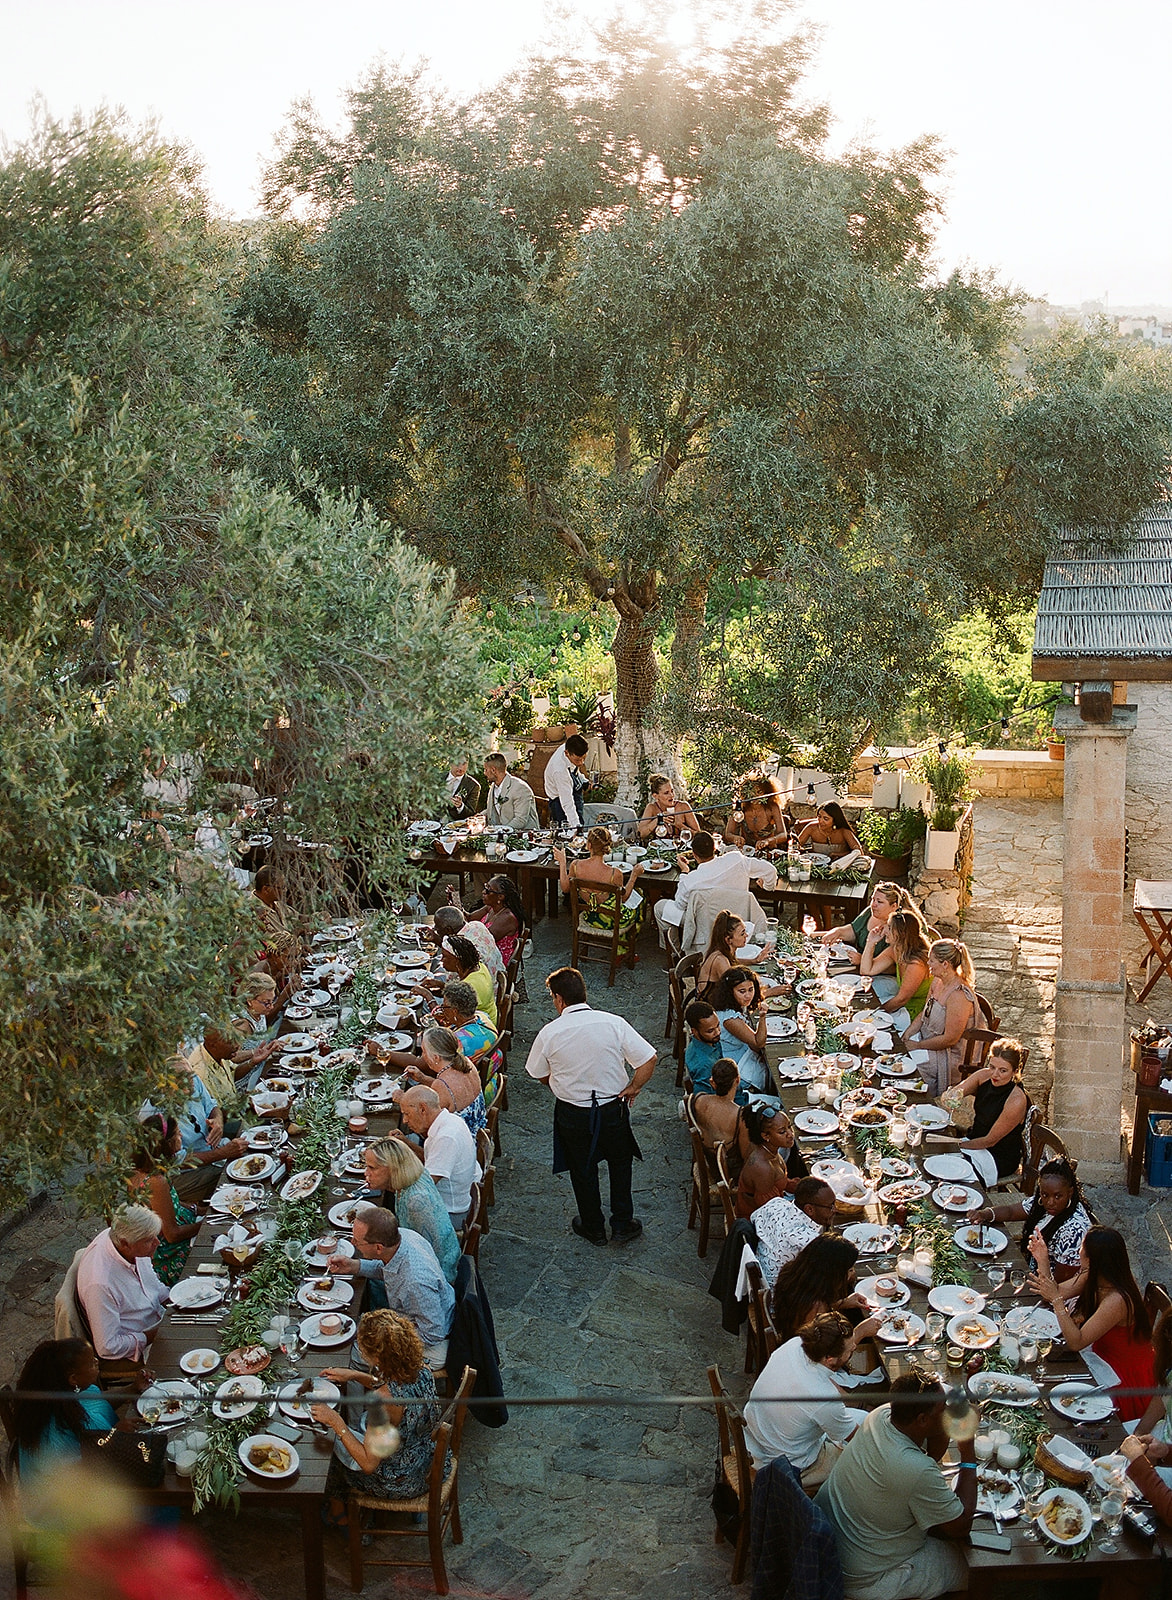 An outdoor dining event at Agreco Farms in Crete, Greece, featuring guests seated at long tables adorned with white tablecloths and fine dinnerware, surrounded by olive trees.